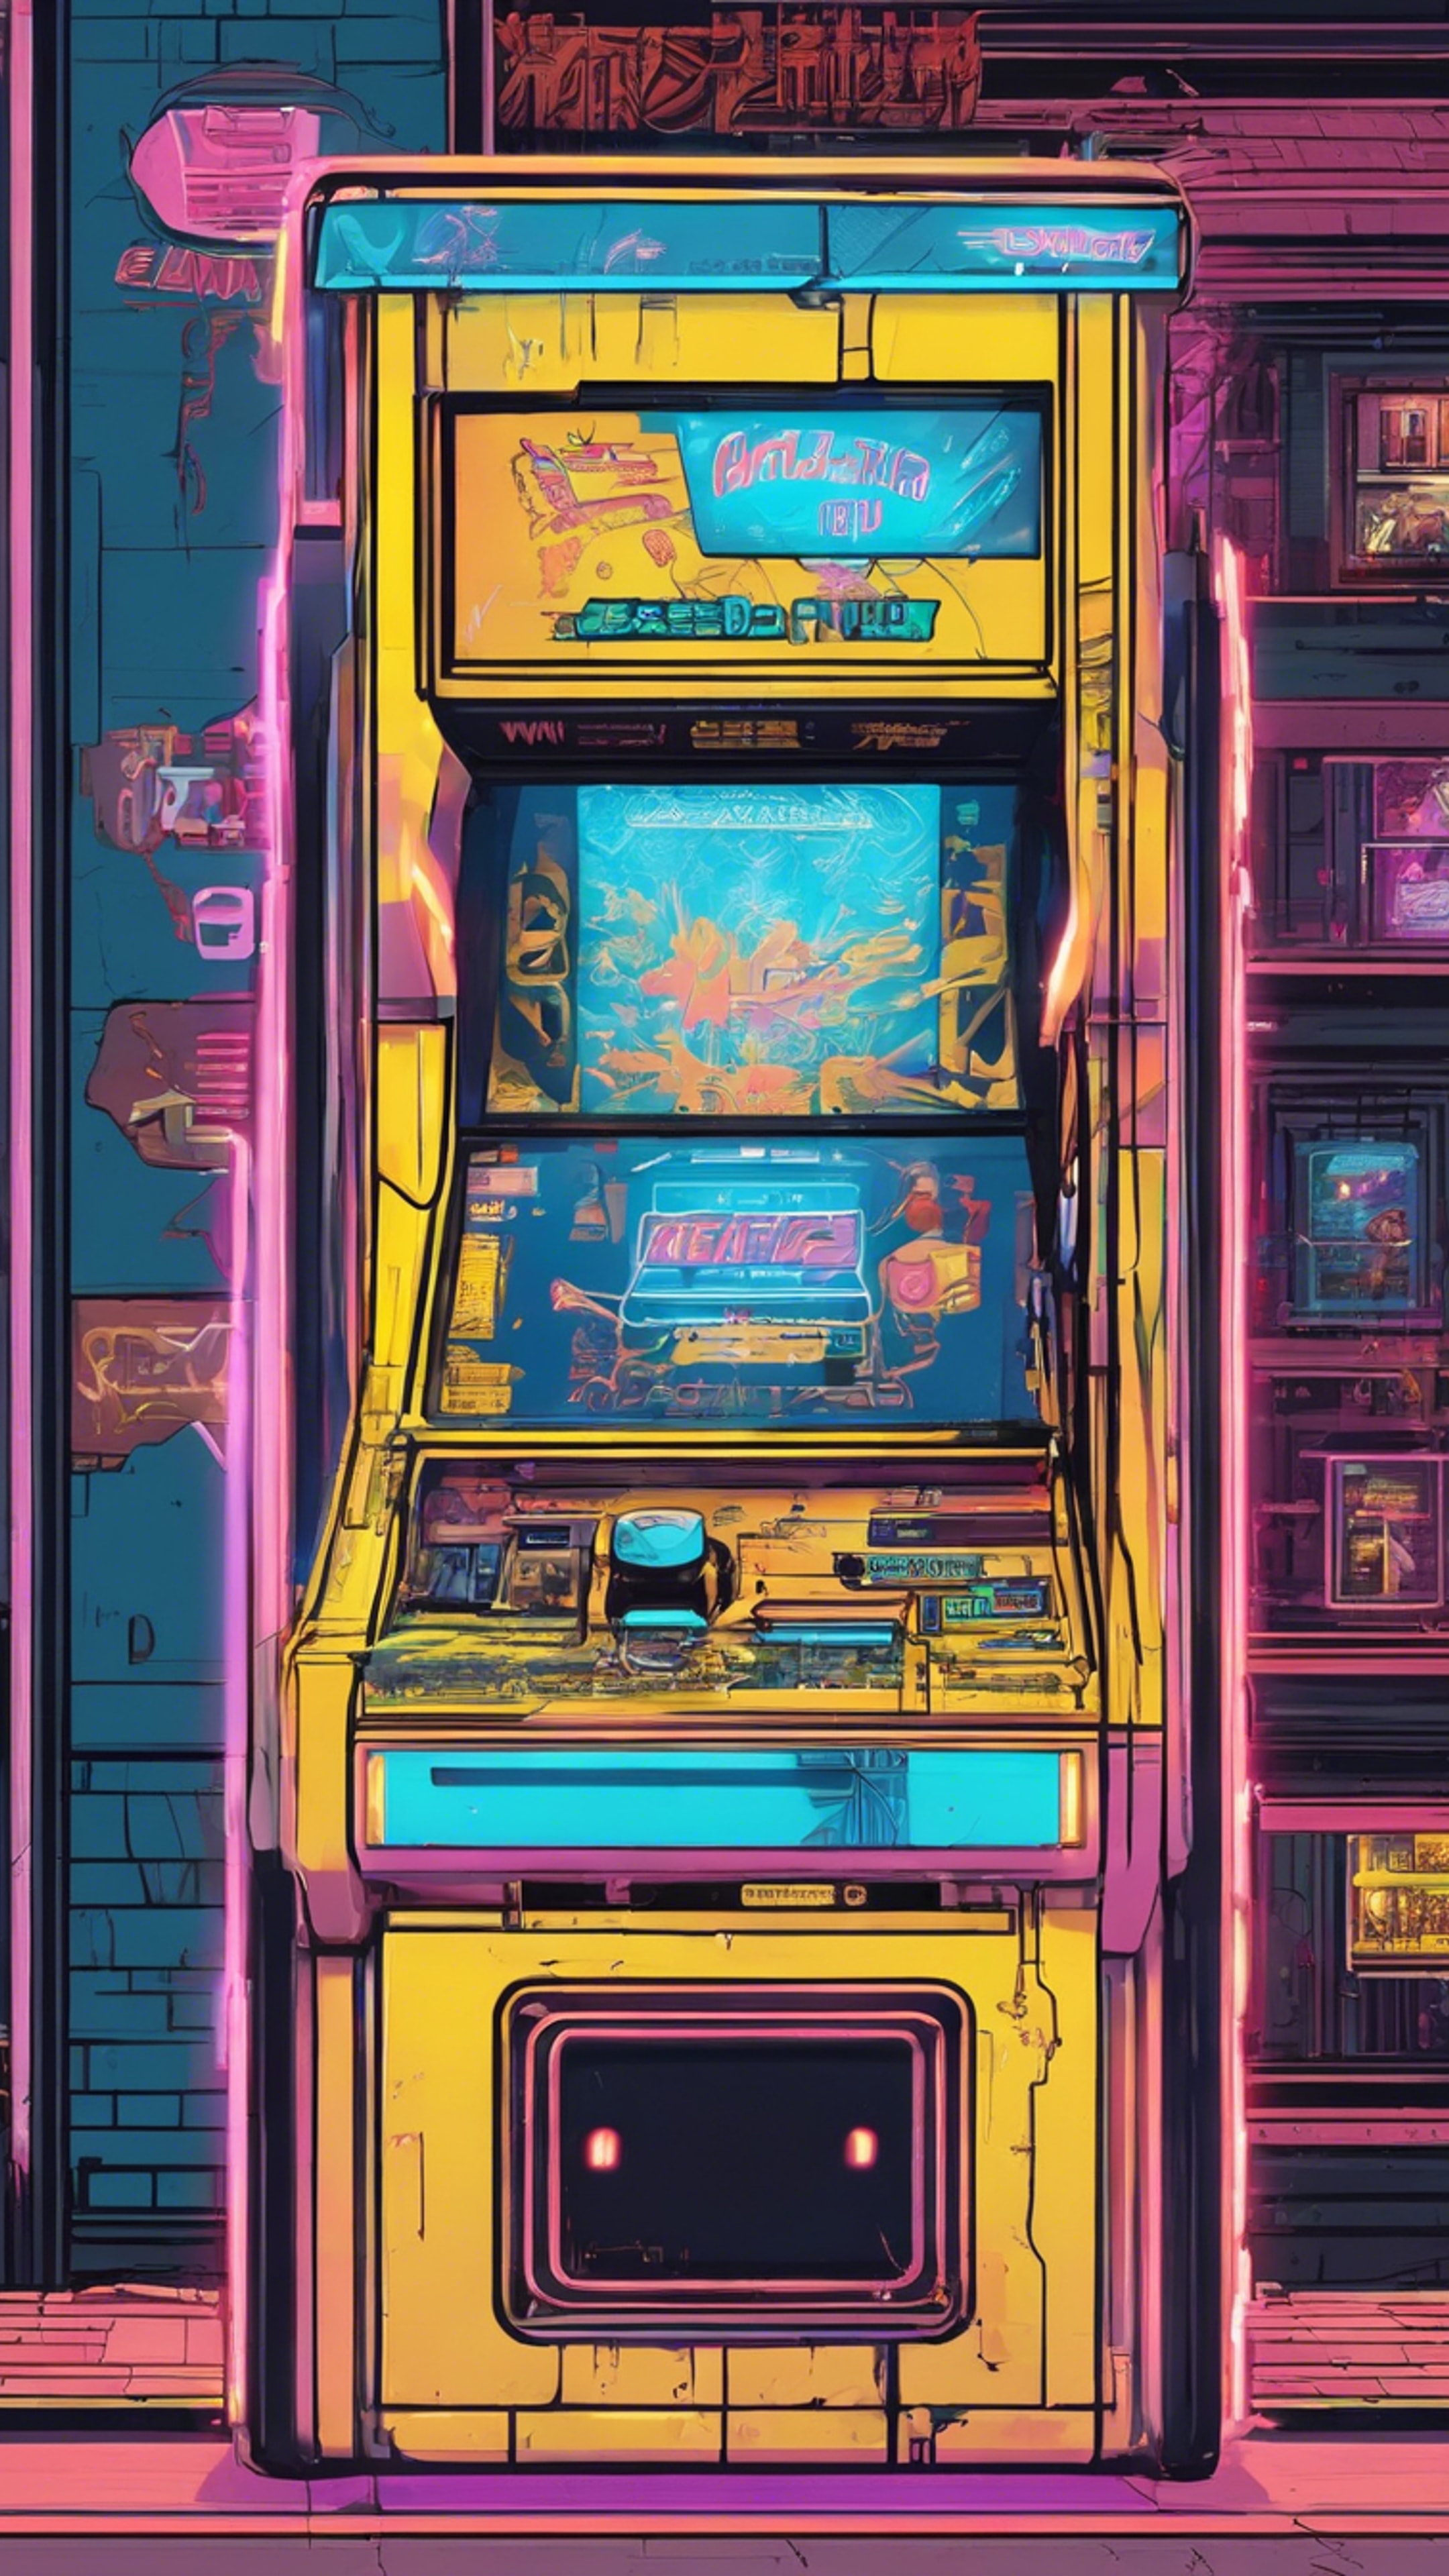 A vintage arcade machine with blue and yellow detailing, set in a retro game shop. Wallpaper[7a93d221b5de45b8b20a]